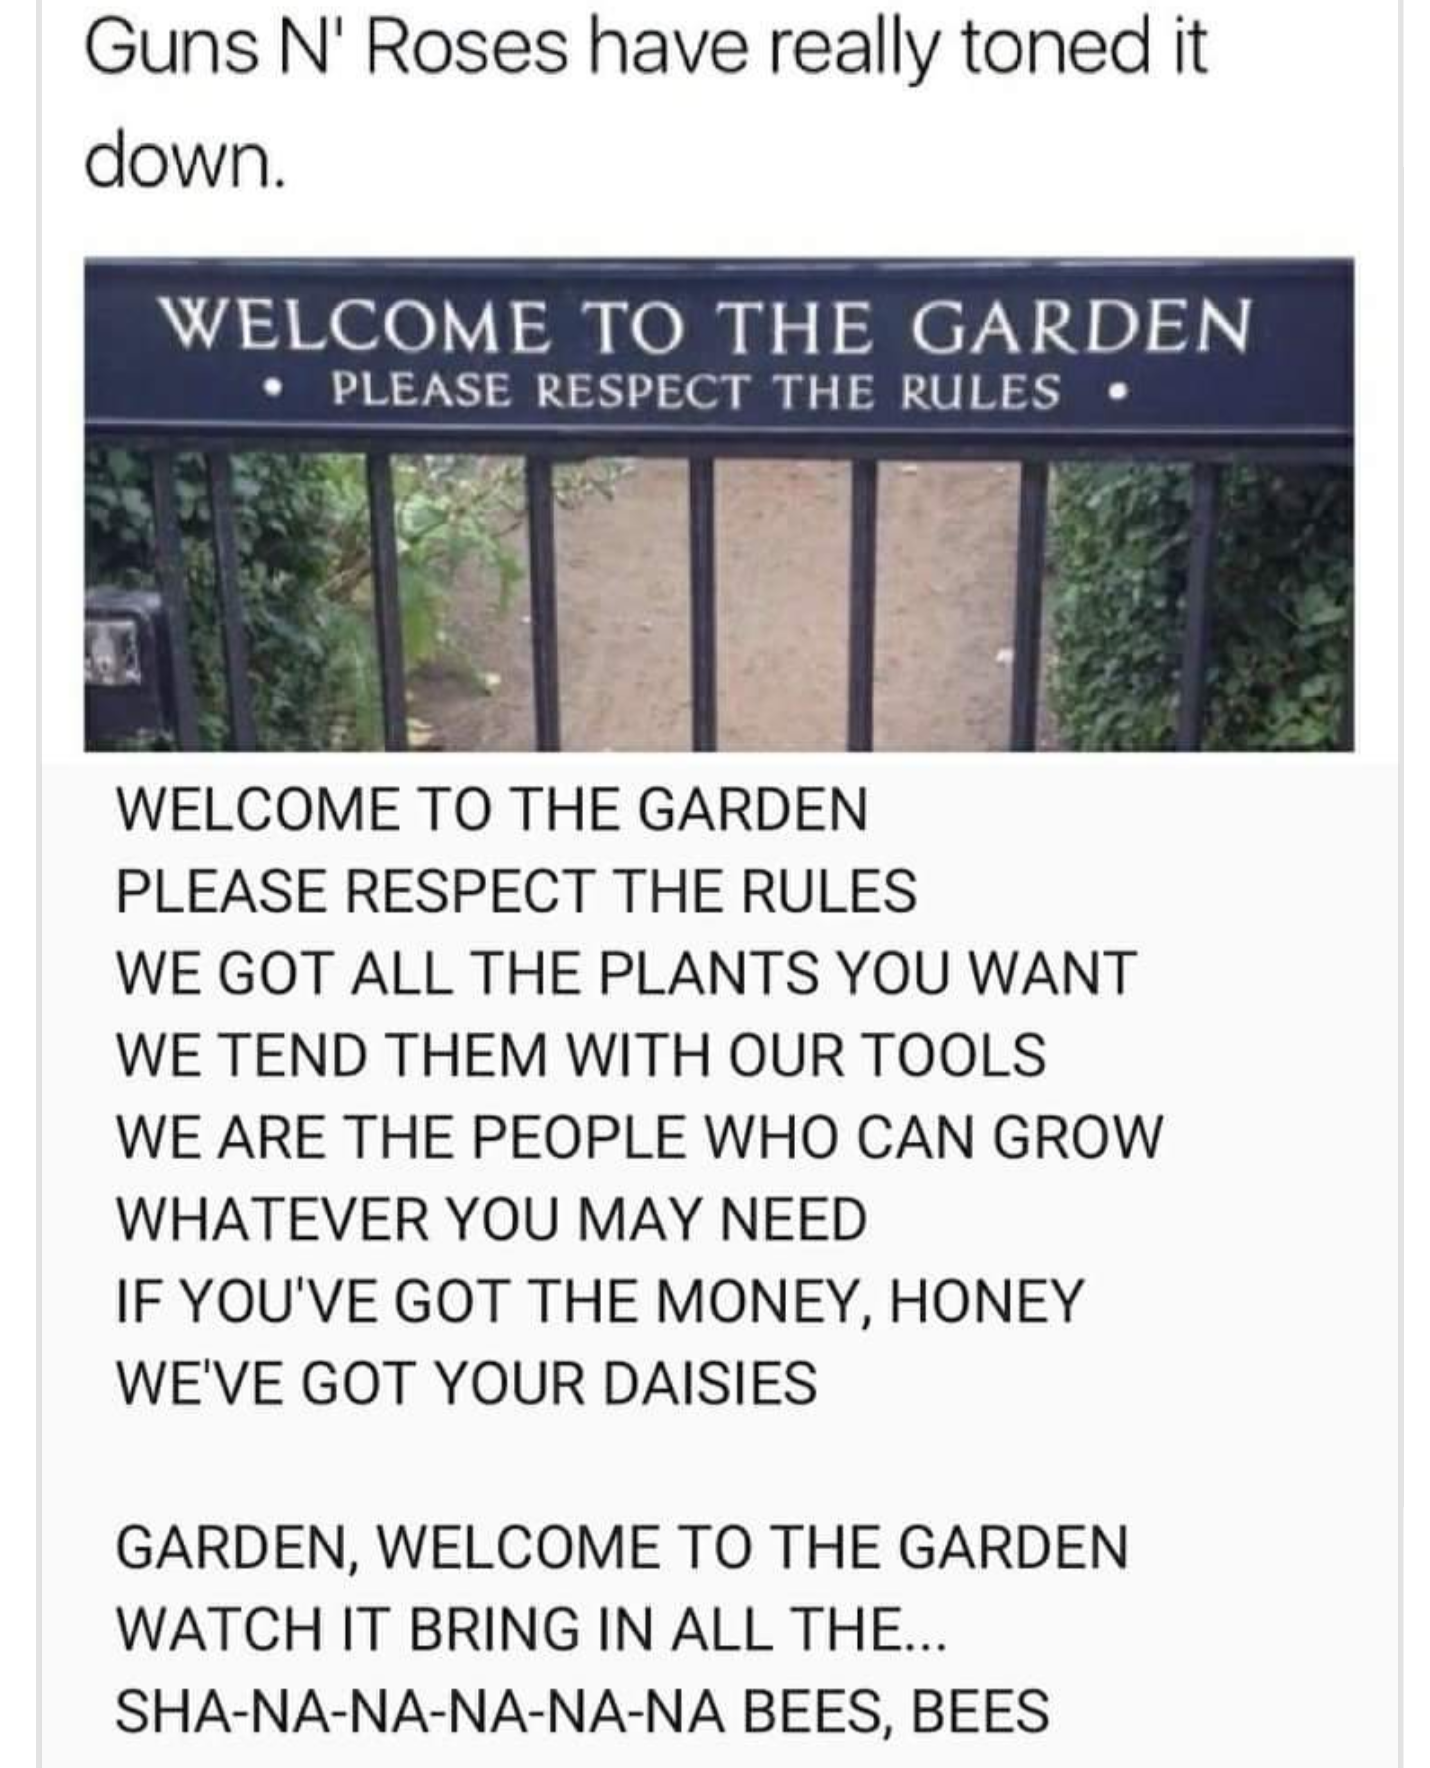 funny memes - welcome to the garden please respect the rules - Guns N' Roses have really toned it down. Welcome To The Garden Please Respect The Rules. Welcome To The Garden Please Respect The Rules We Got All The Plants You Want We Tend Them With Our Too